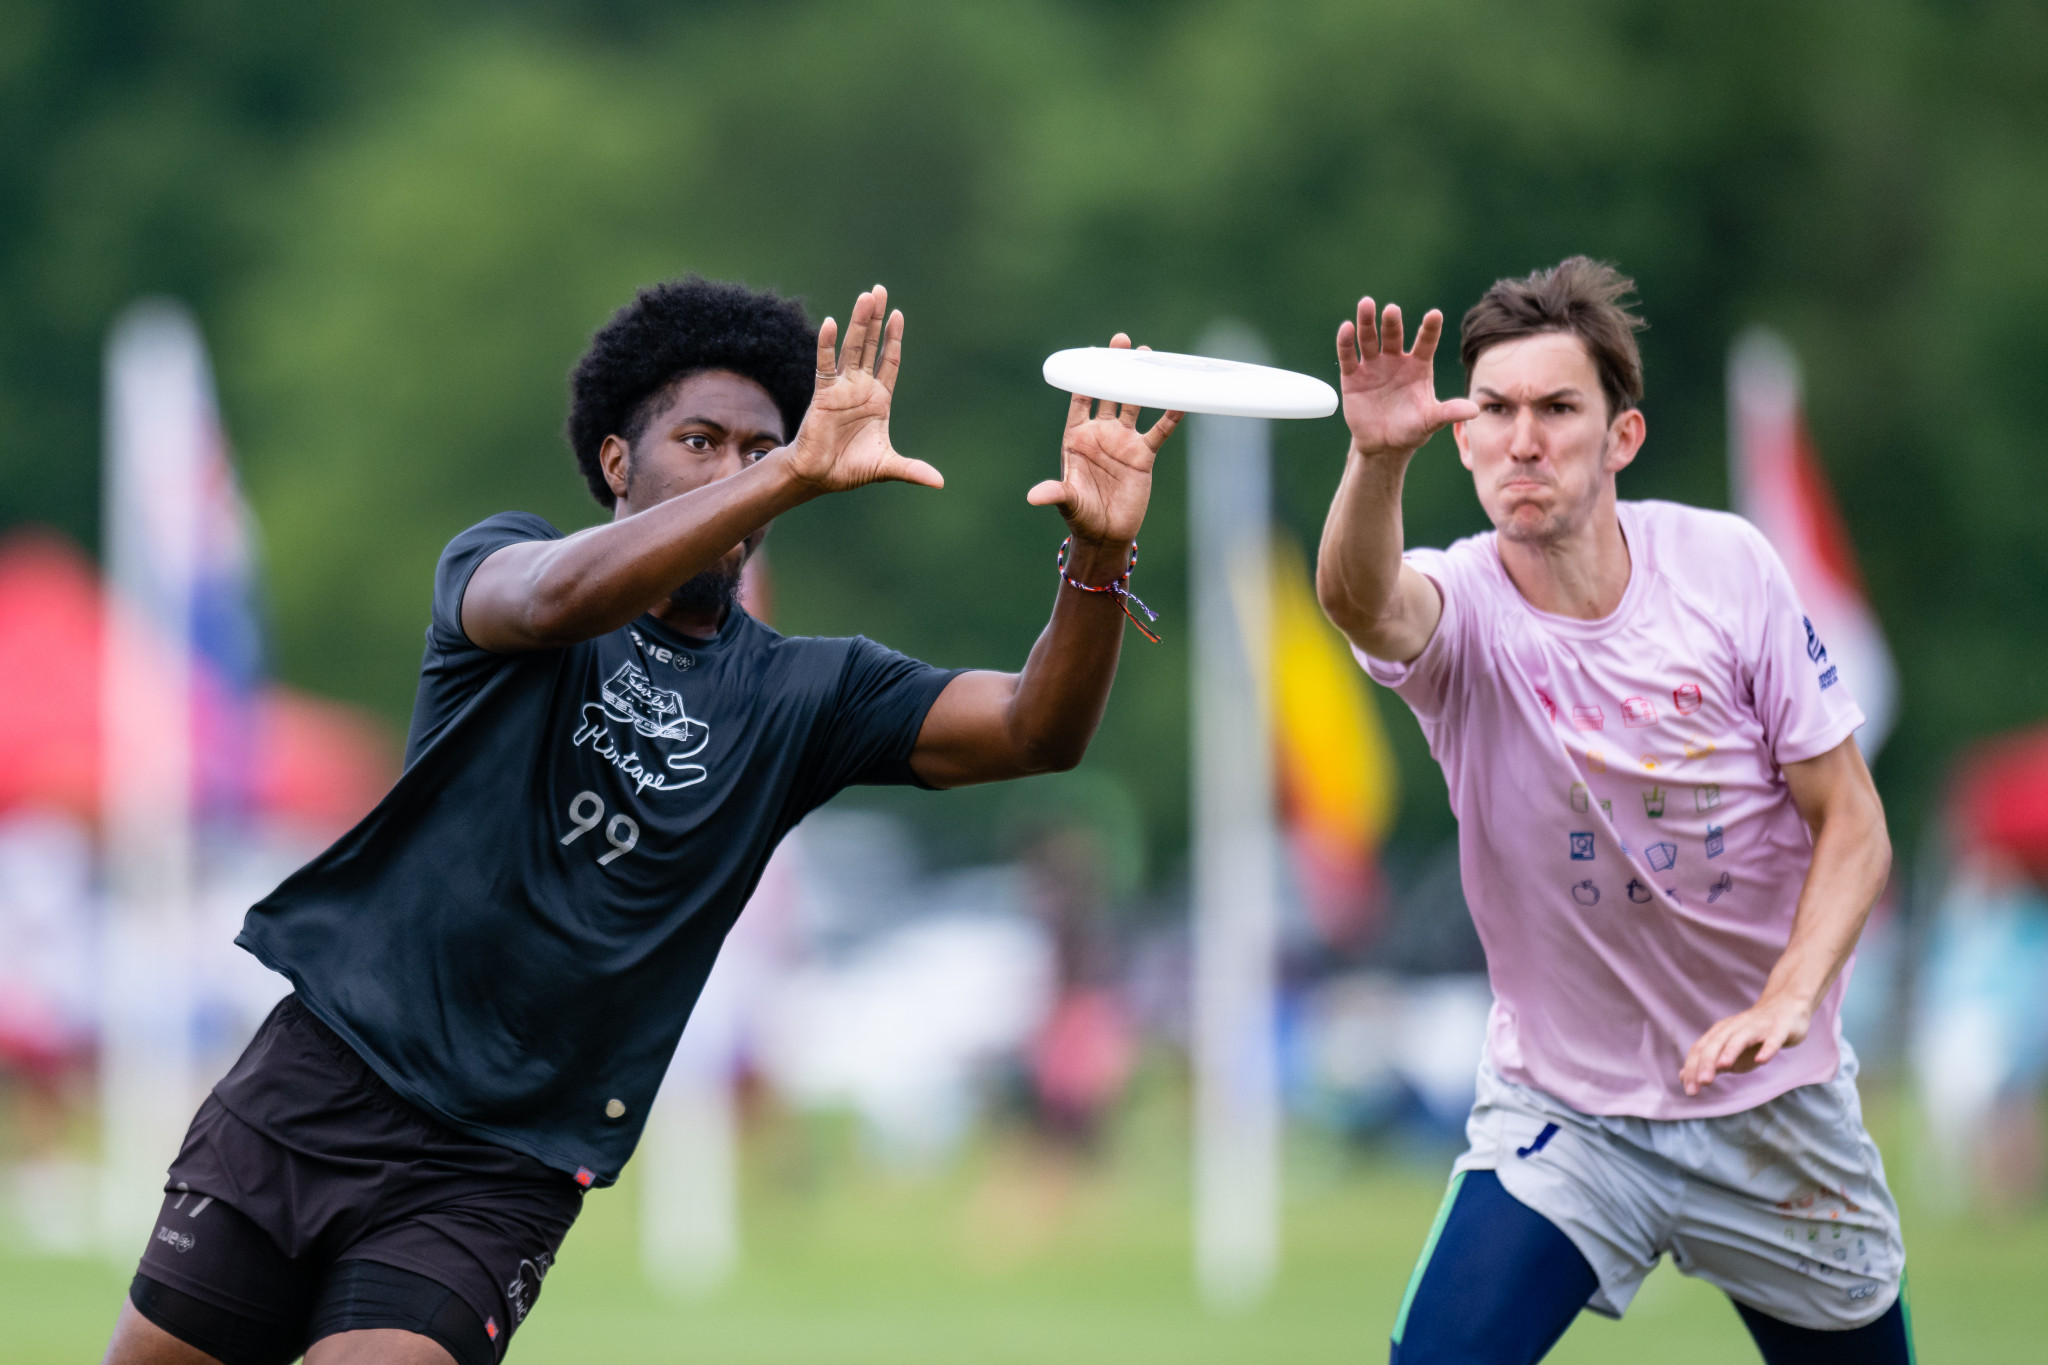 Seattle Mixtape's Khalif El-Salaam caught the disc while under pressure from Lunch Box Ultimate Club's Max Halden, right © Samuel Hotaling for UltiPhotos